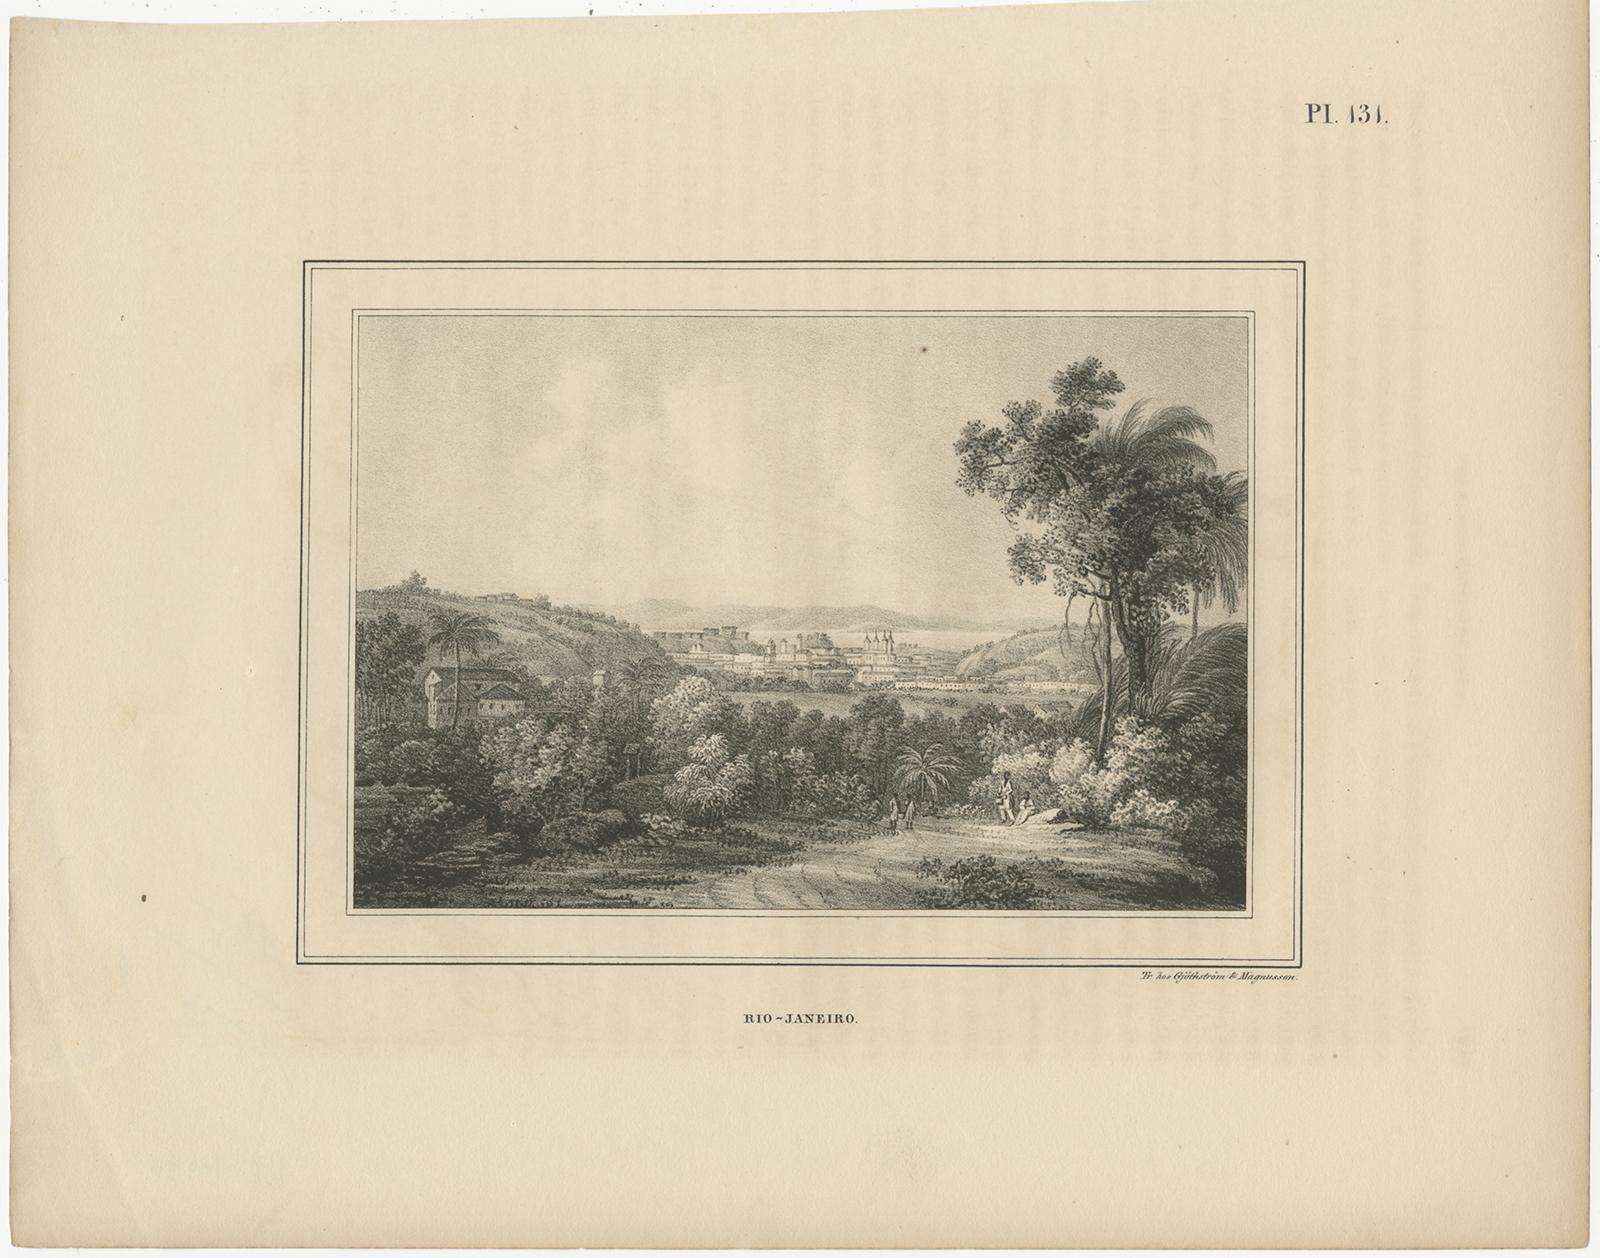 Antique print titled 'Rio-Janeiro'. View of Rio de Janeiro, Brazil. Signed Gjöthström and Magnusson. Source unknown, to be determined. Published circa 1900.